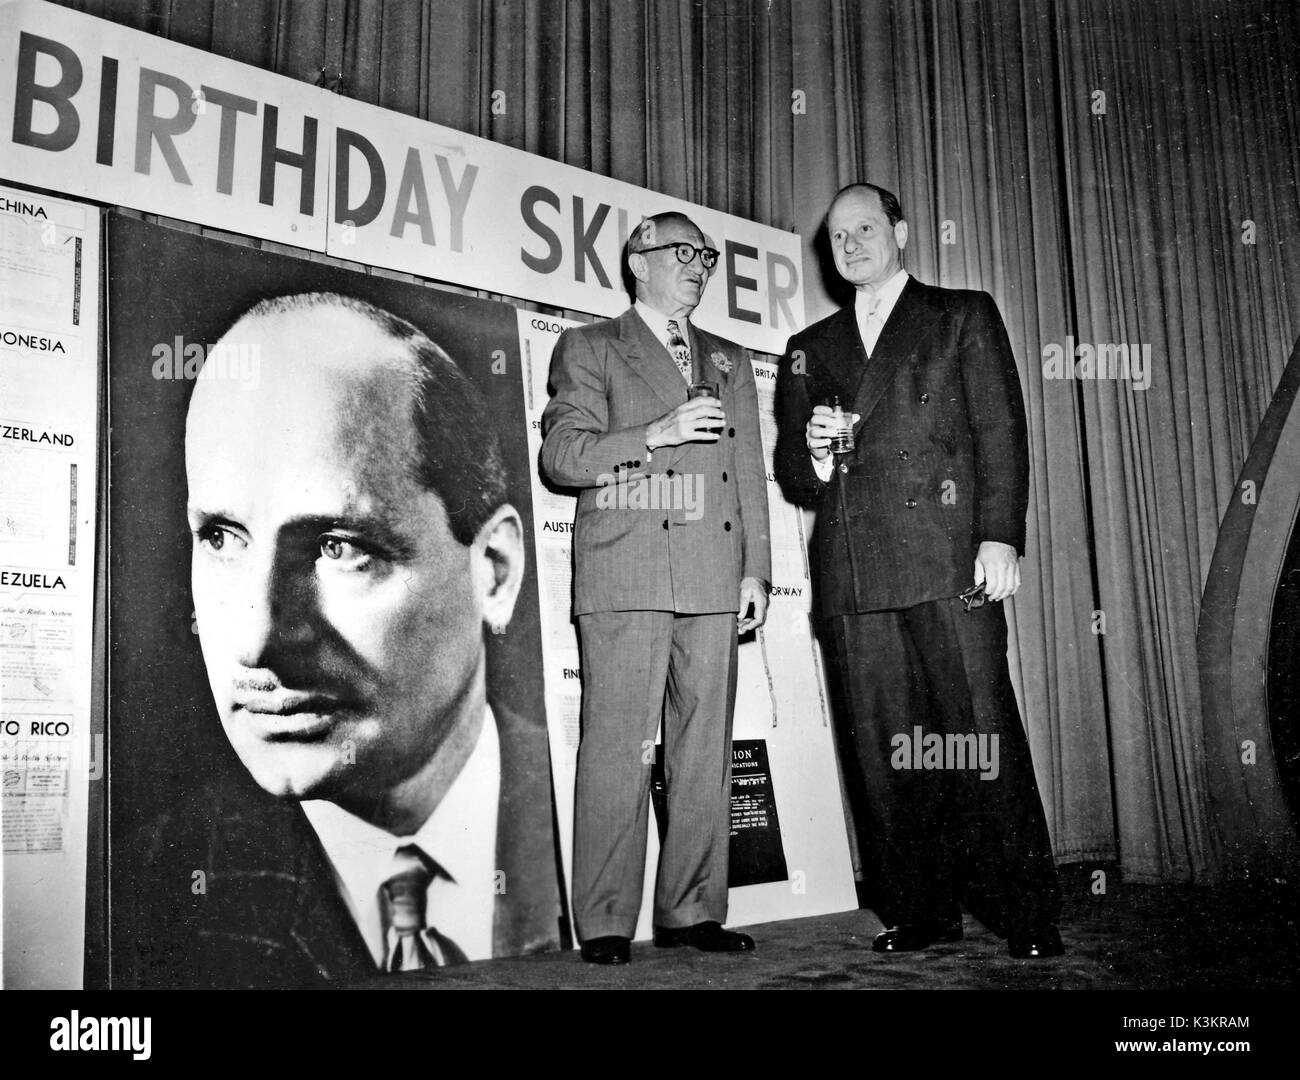 NICHOLAS M SCHENCK, president of Loew's Incorporated, the parent company of MGM, toasts Arthur M Loew at the surprise birthday party held for 'the Skipper' at the home office' Stock Photo